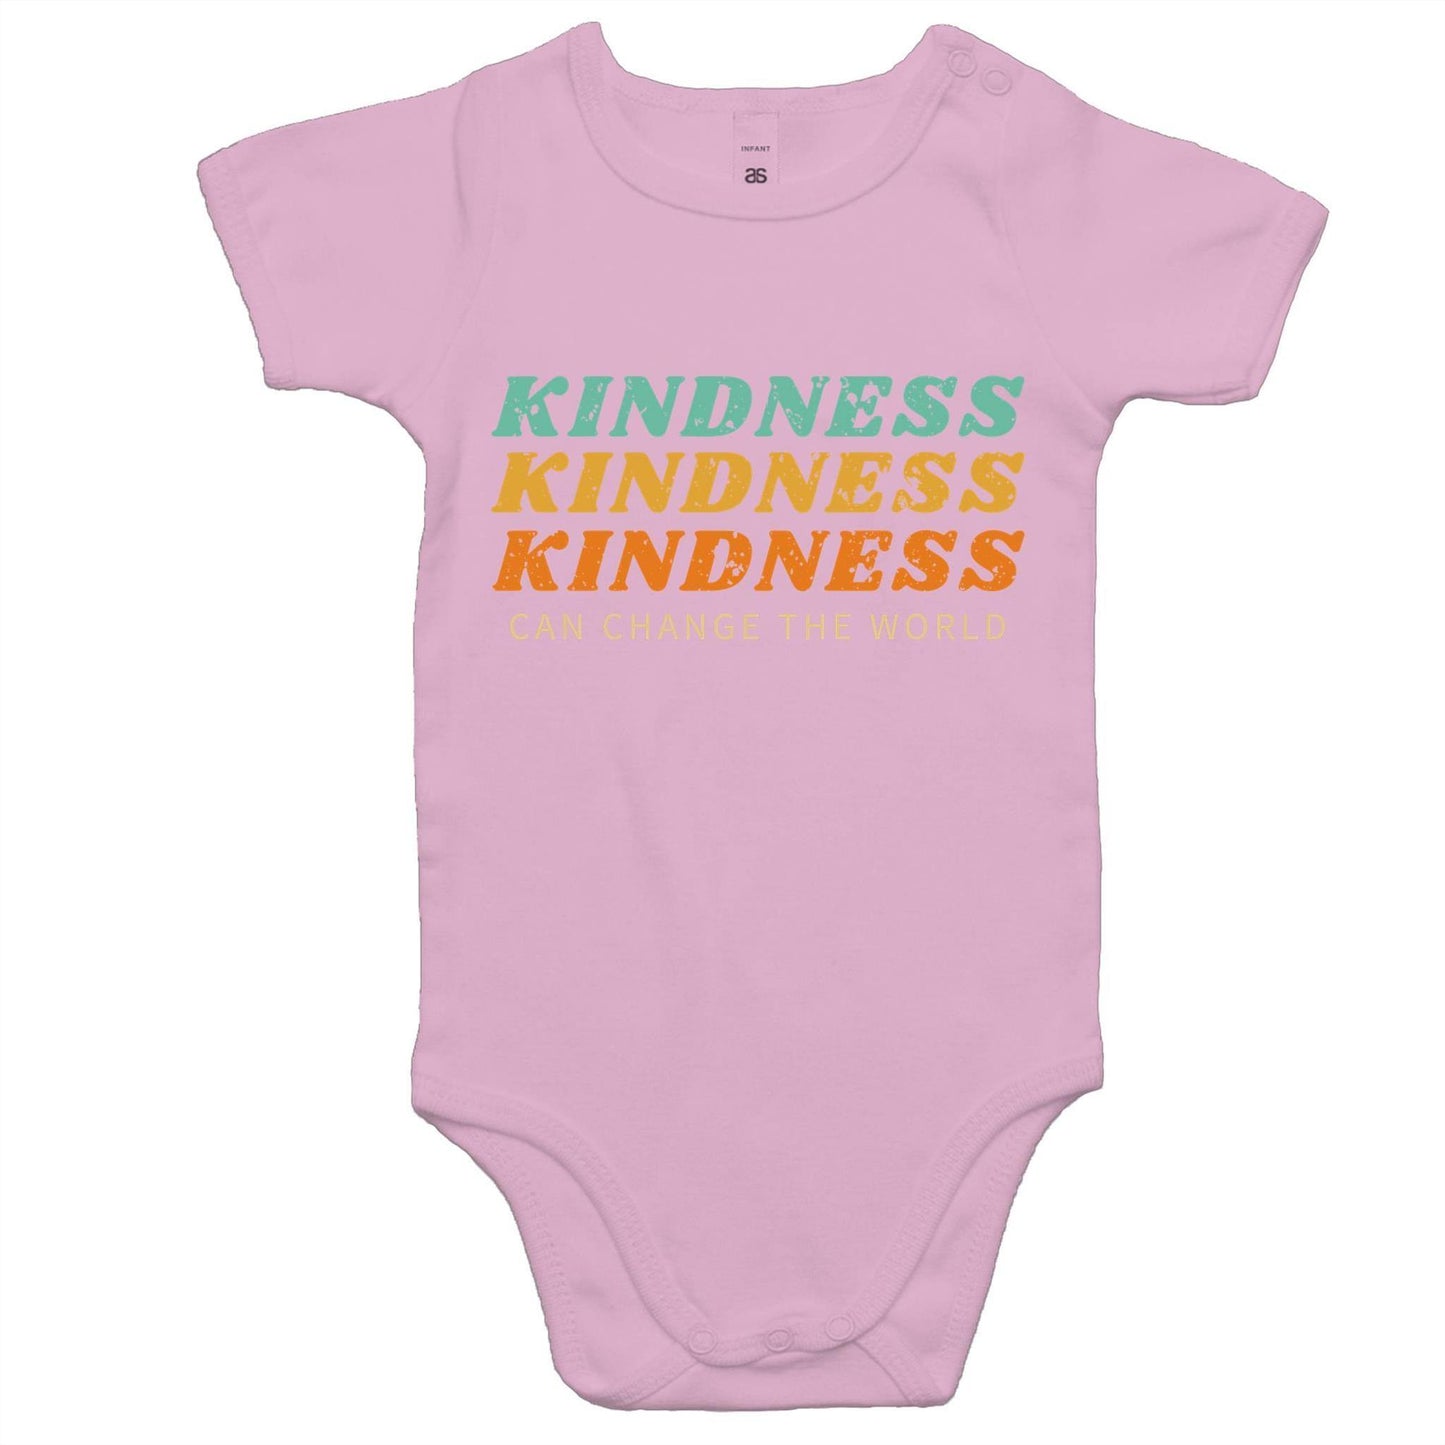 Kindness Can Change The World - Baby Bodysuit Pink Baby Bodysuit kids Retro